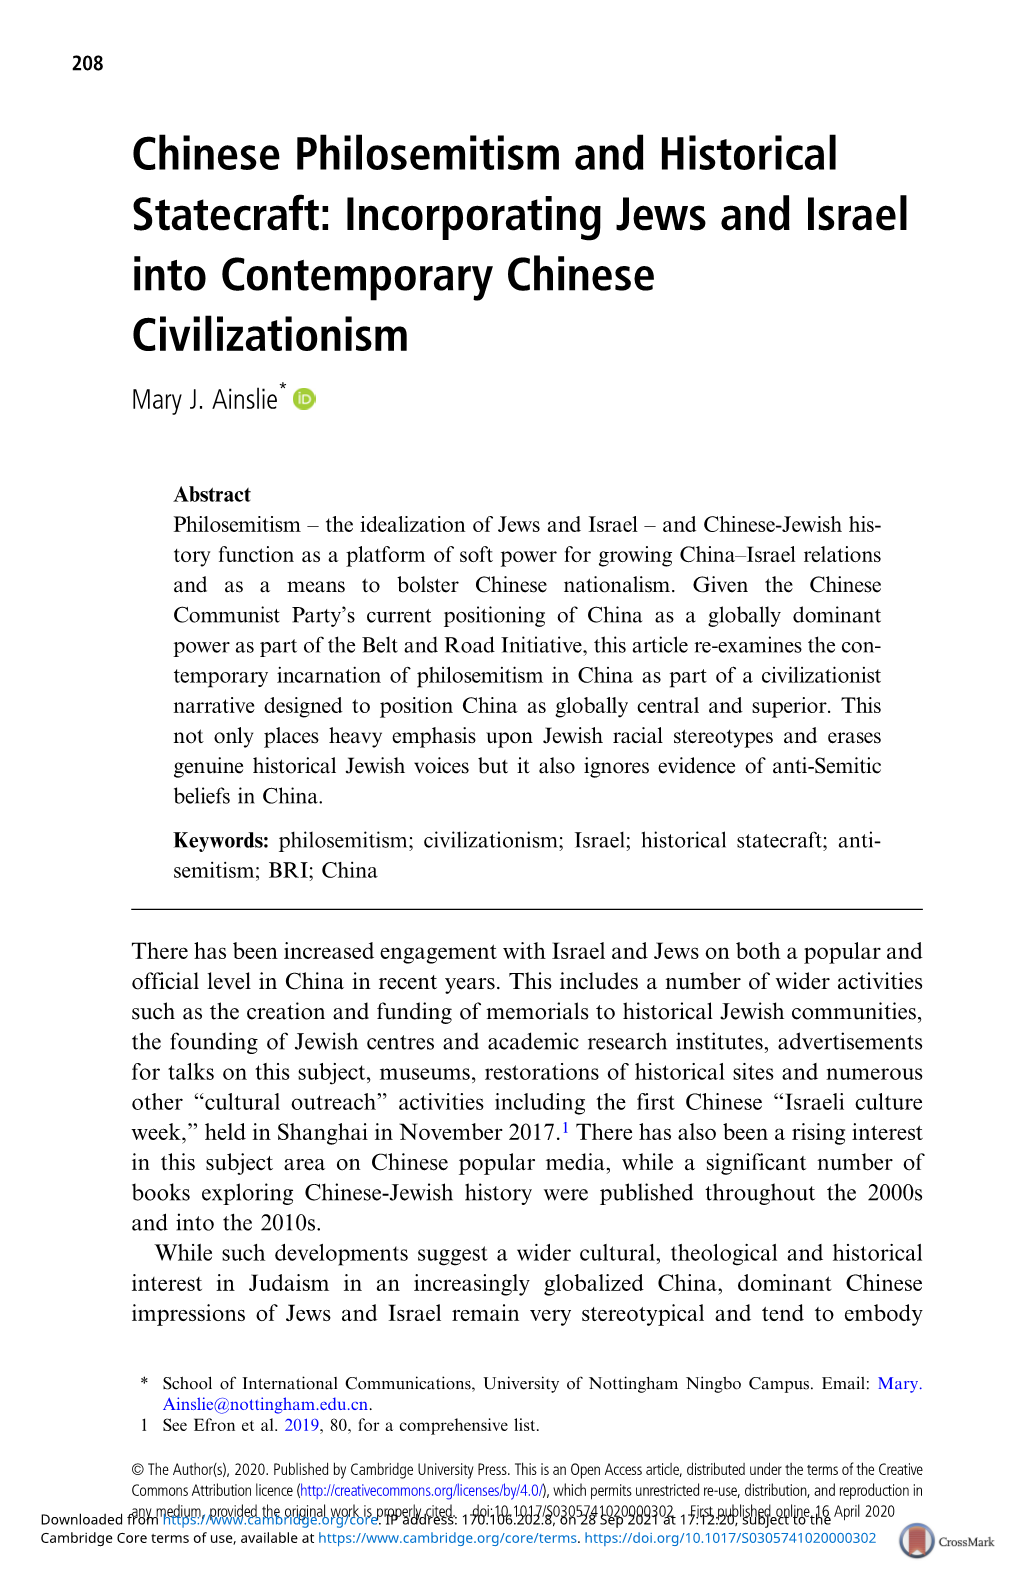 Chinese Philosemitism and Historical Statecraft: Incorporating Jews and Israel Into Contemporary Chinese Civilizationism Mary J